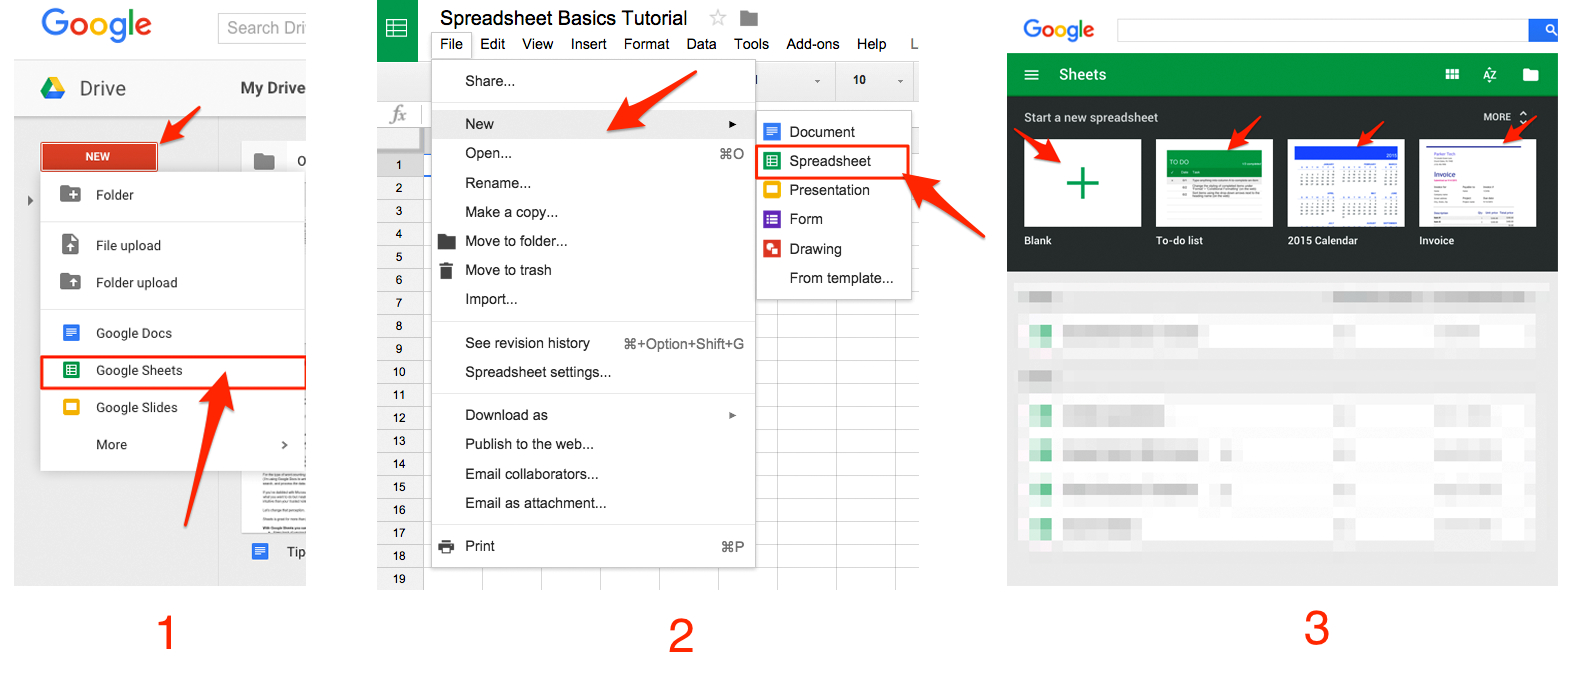 Google Spreadsheet Tutorial Throughout Google Sheets 101: The Beginner's Guide To Online Spreadsheets  The